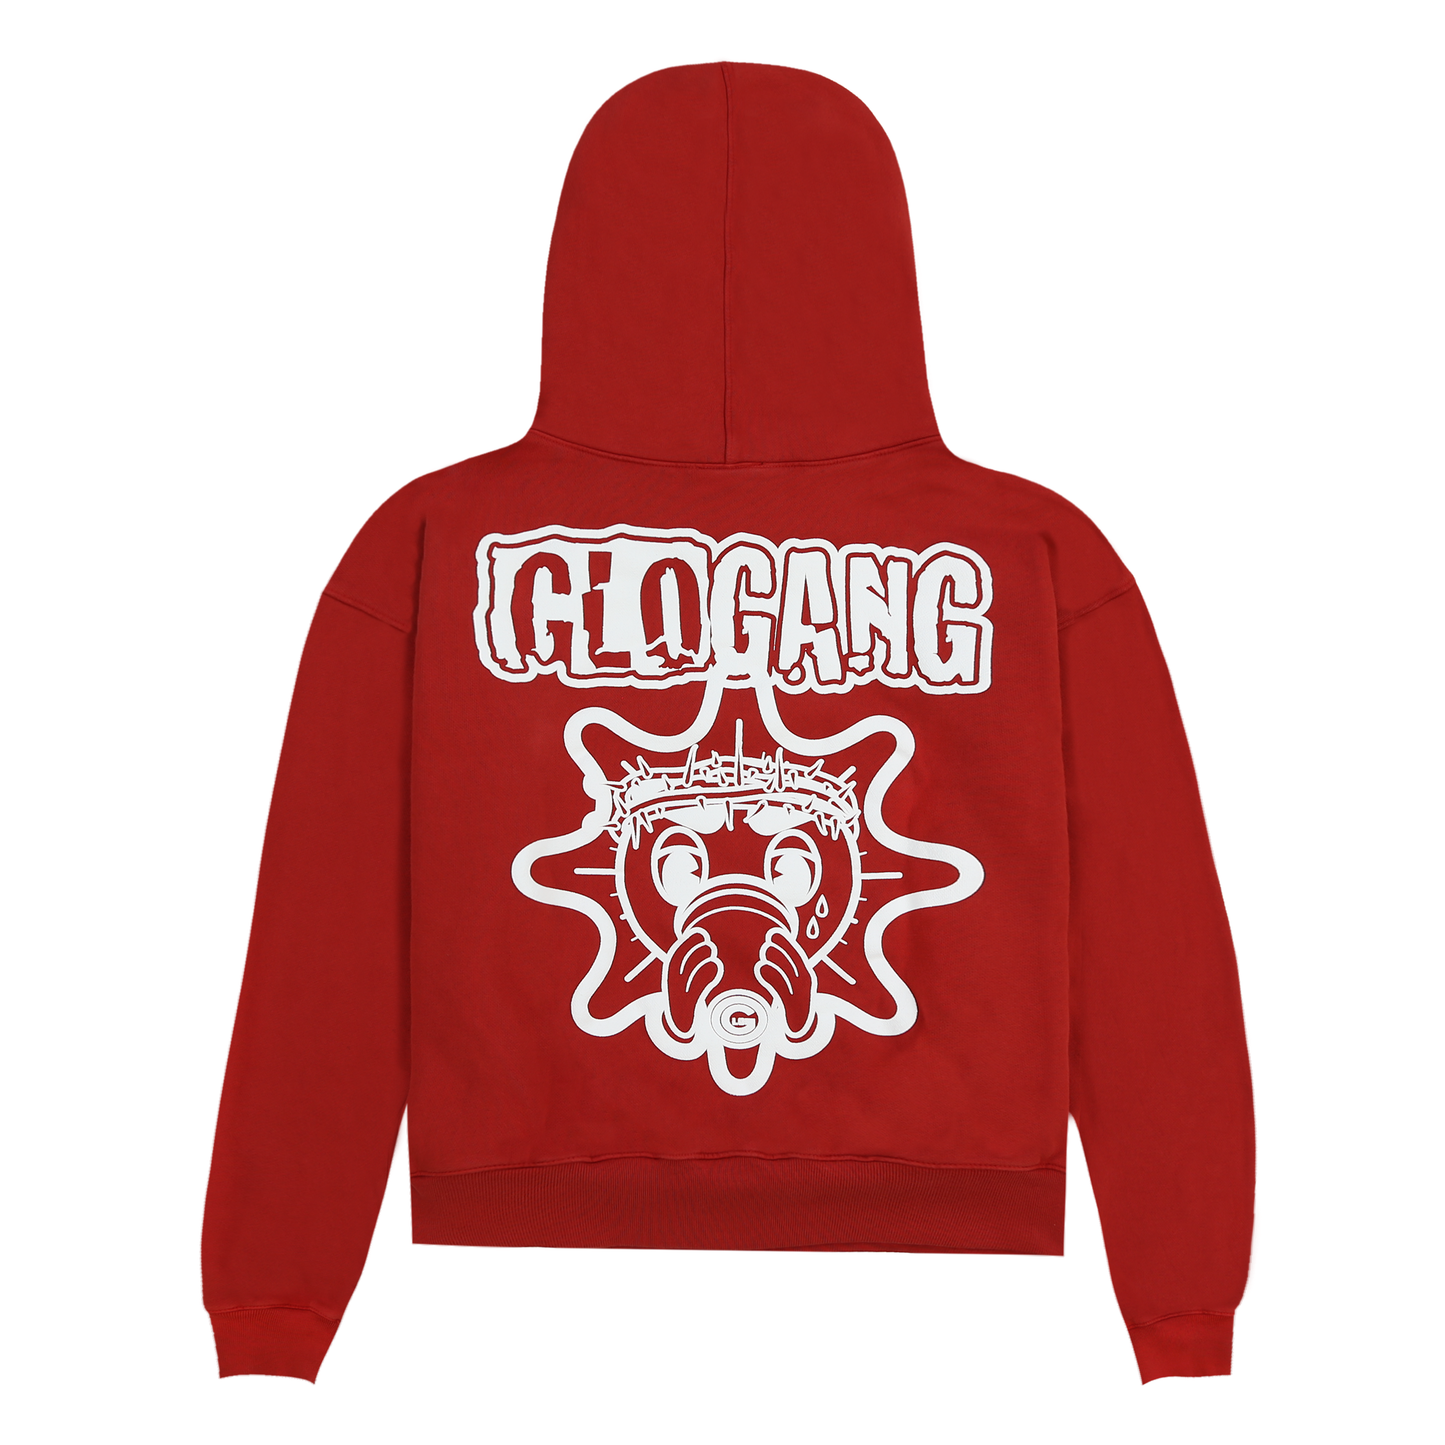 Glo Sun Font Hoodie (Red)